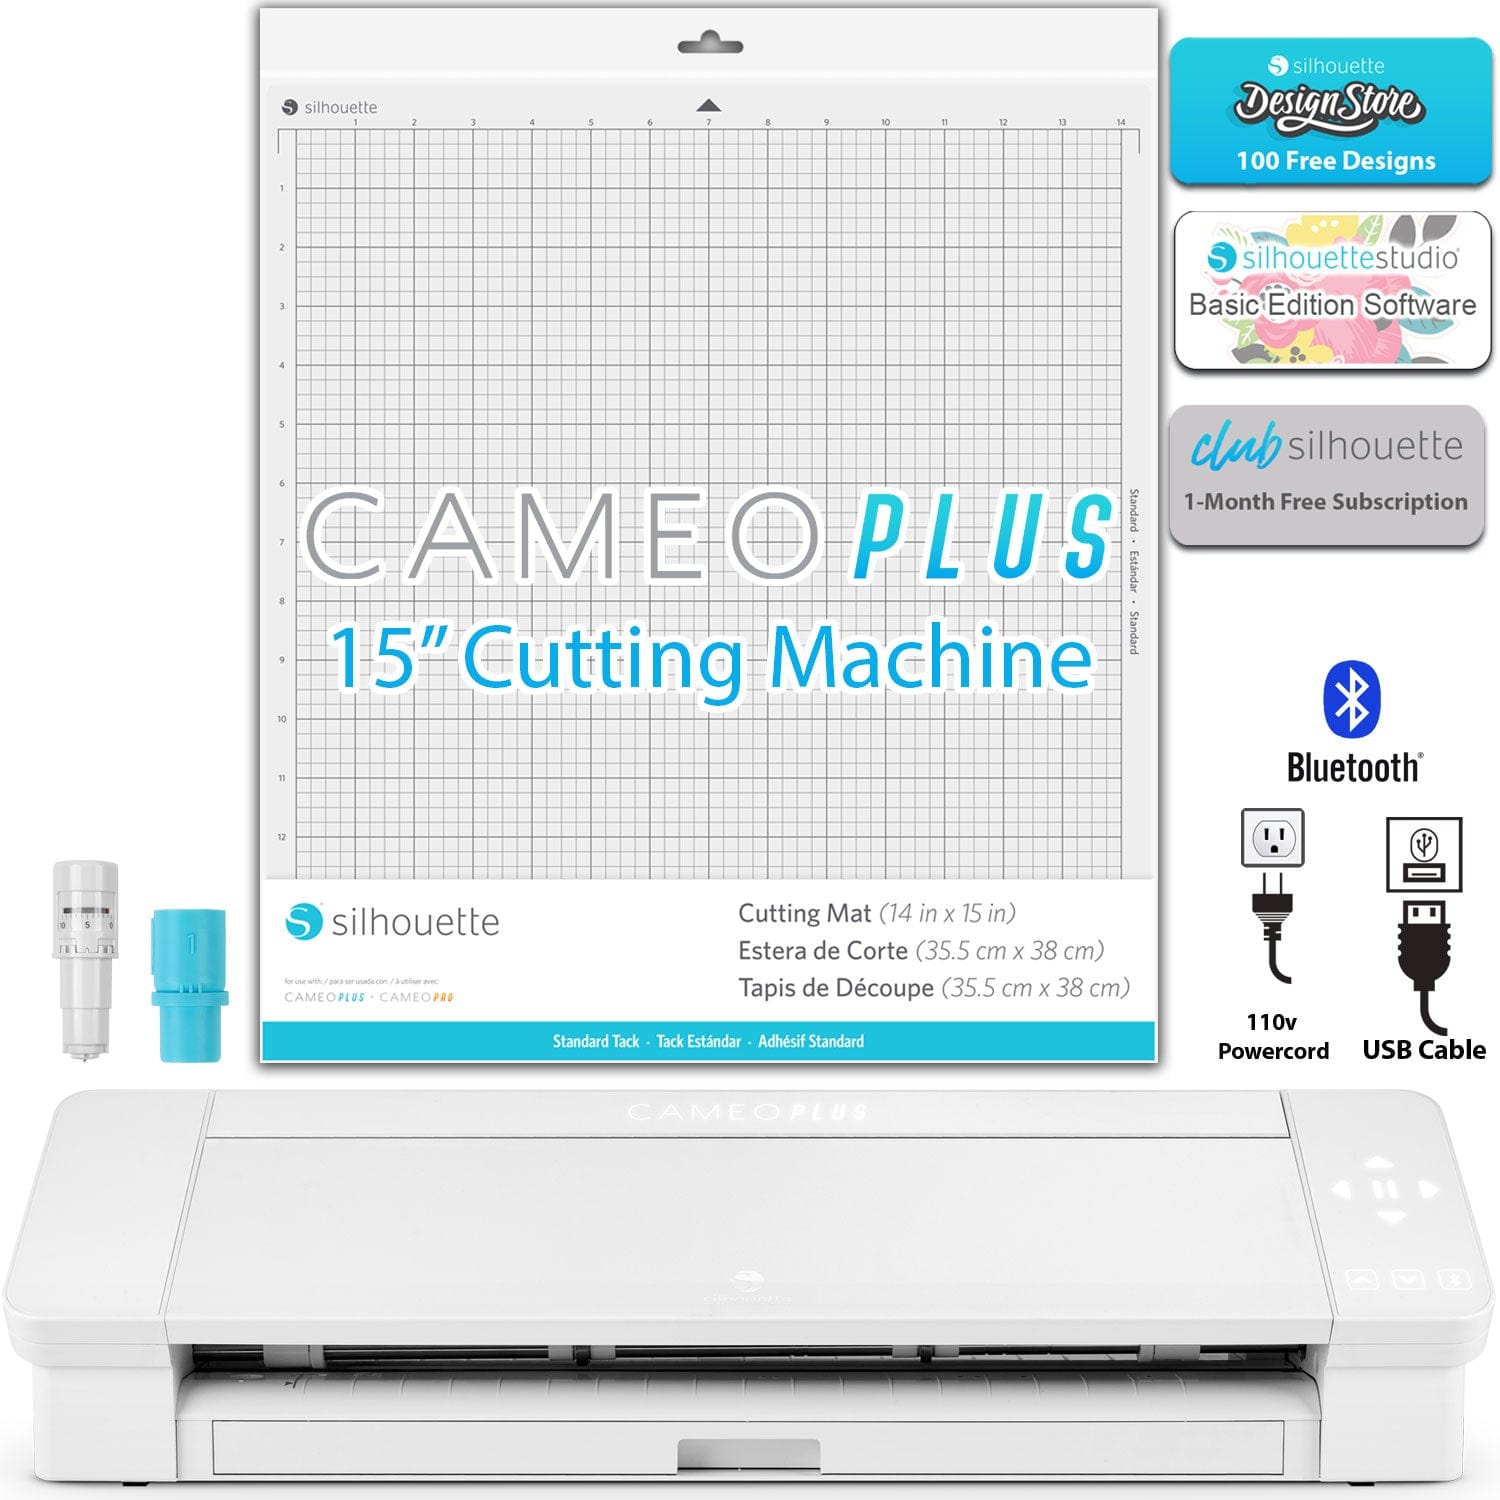 Silhouette America Craft Cutters Silhouette Cameo 4 Plus Bundle with 4- Rolls of ORACAL 651 Vinyl, 1 Roll of ORATAPE Transfer Tape, Vinyl Tool Kit, 12+ Ebooks, Classes, and more